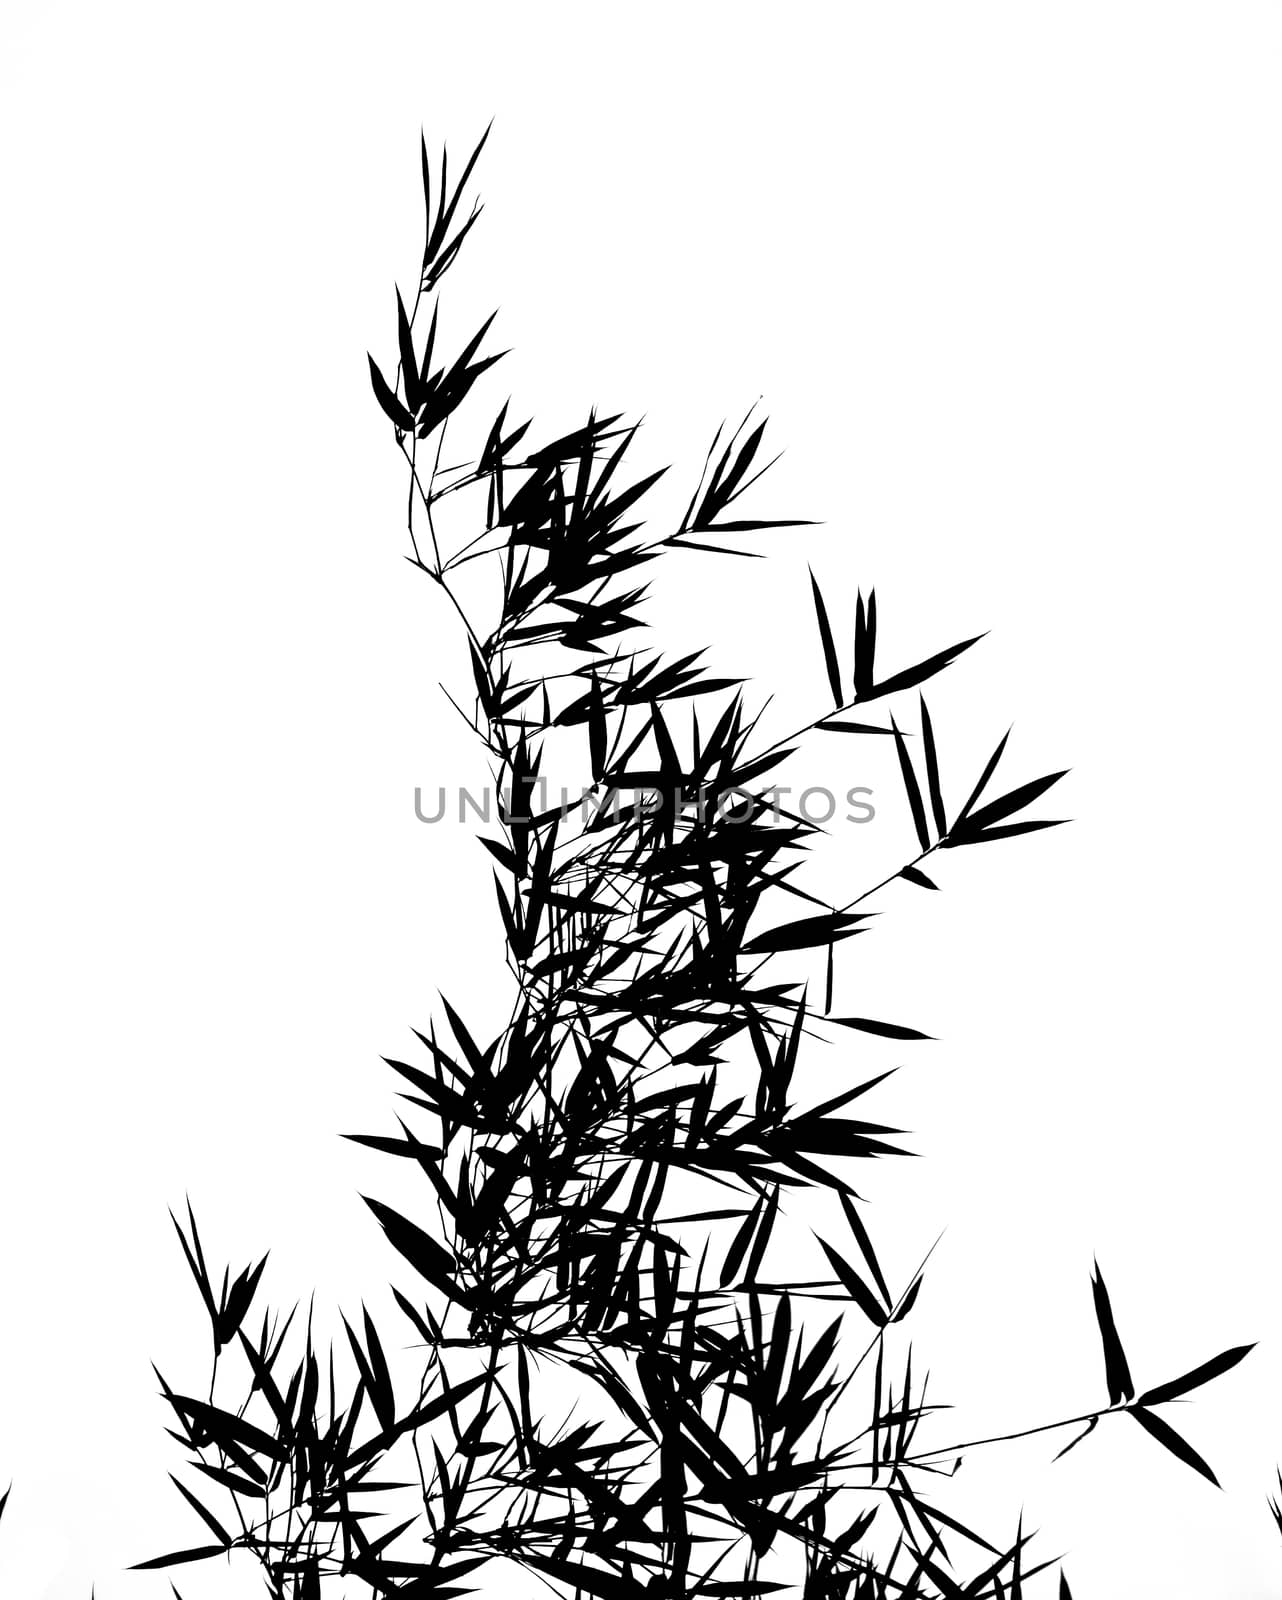 The leaves and branches of a bamboo tree seen as a silhouette
